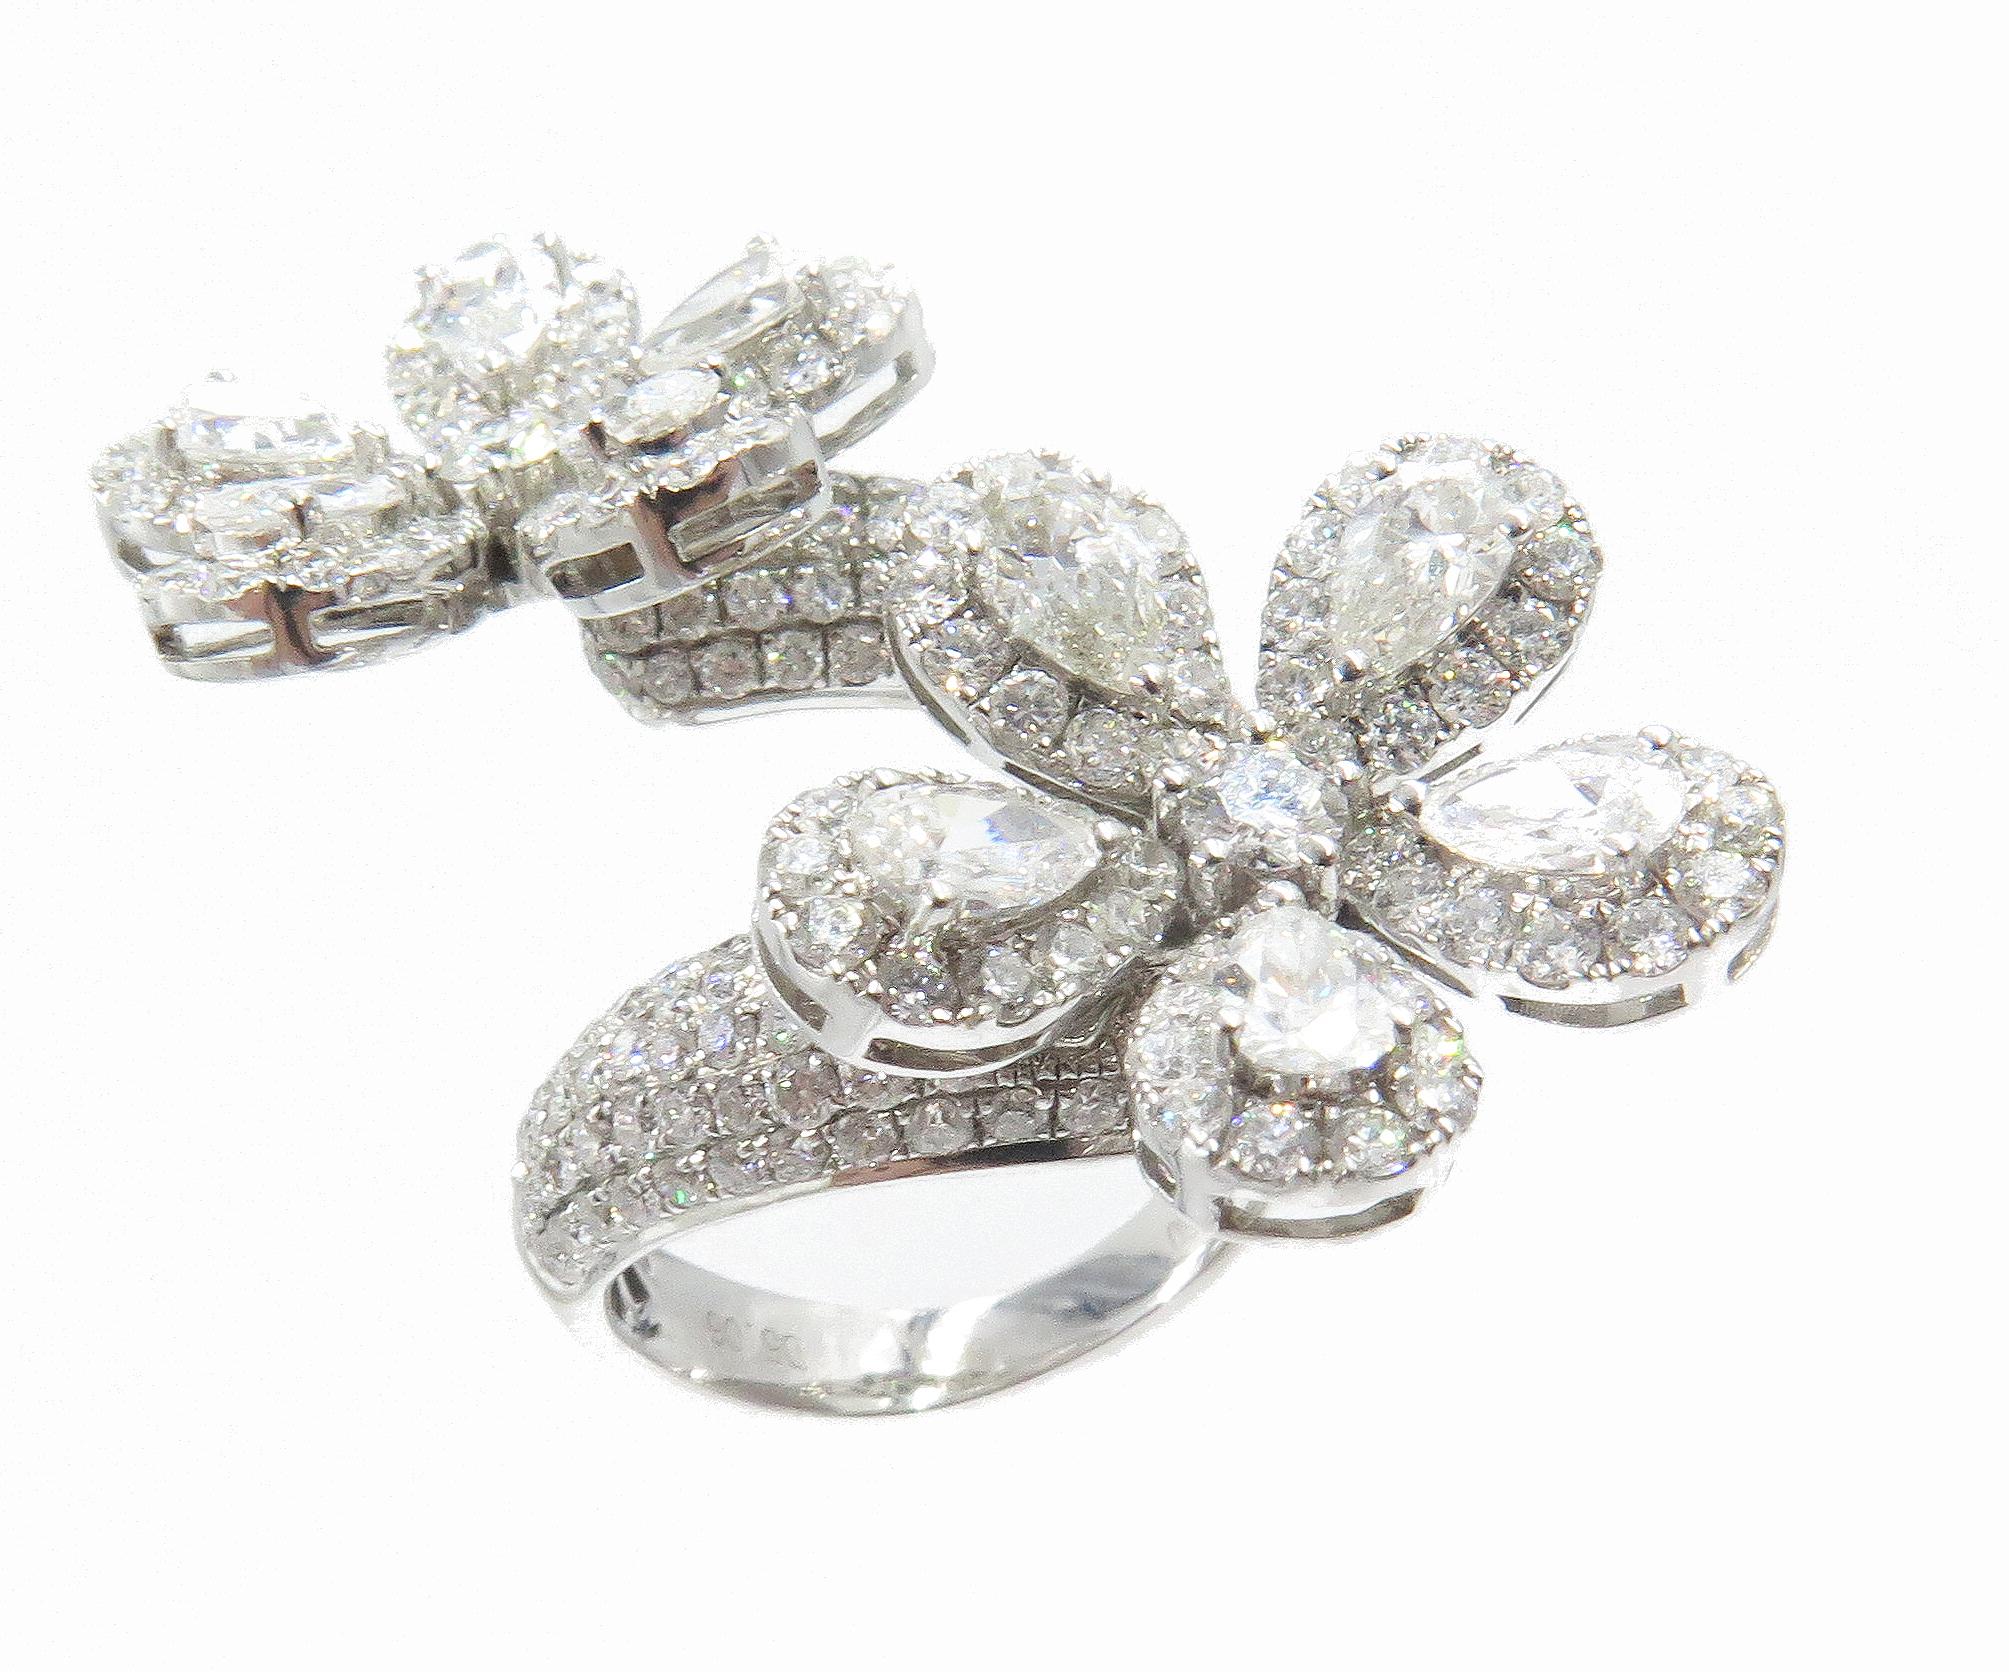  The lustrous harmony of 18k white gold and diamonds is highlighted in this beautifully handcrafted fancy double flower ring. Add sparkle to your fingers with these glistening blossoms, blooming with 5.06cts of diamonds. Each flower contains 61